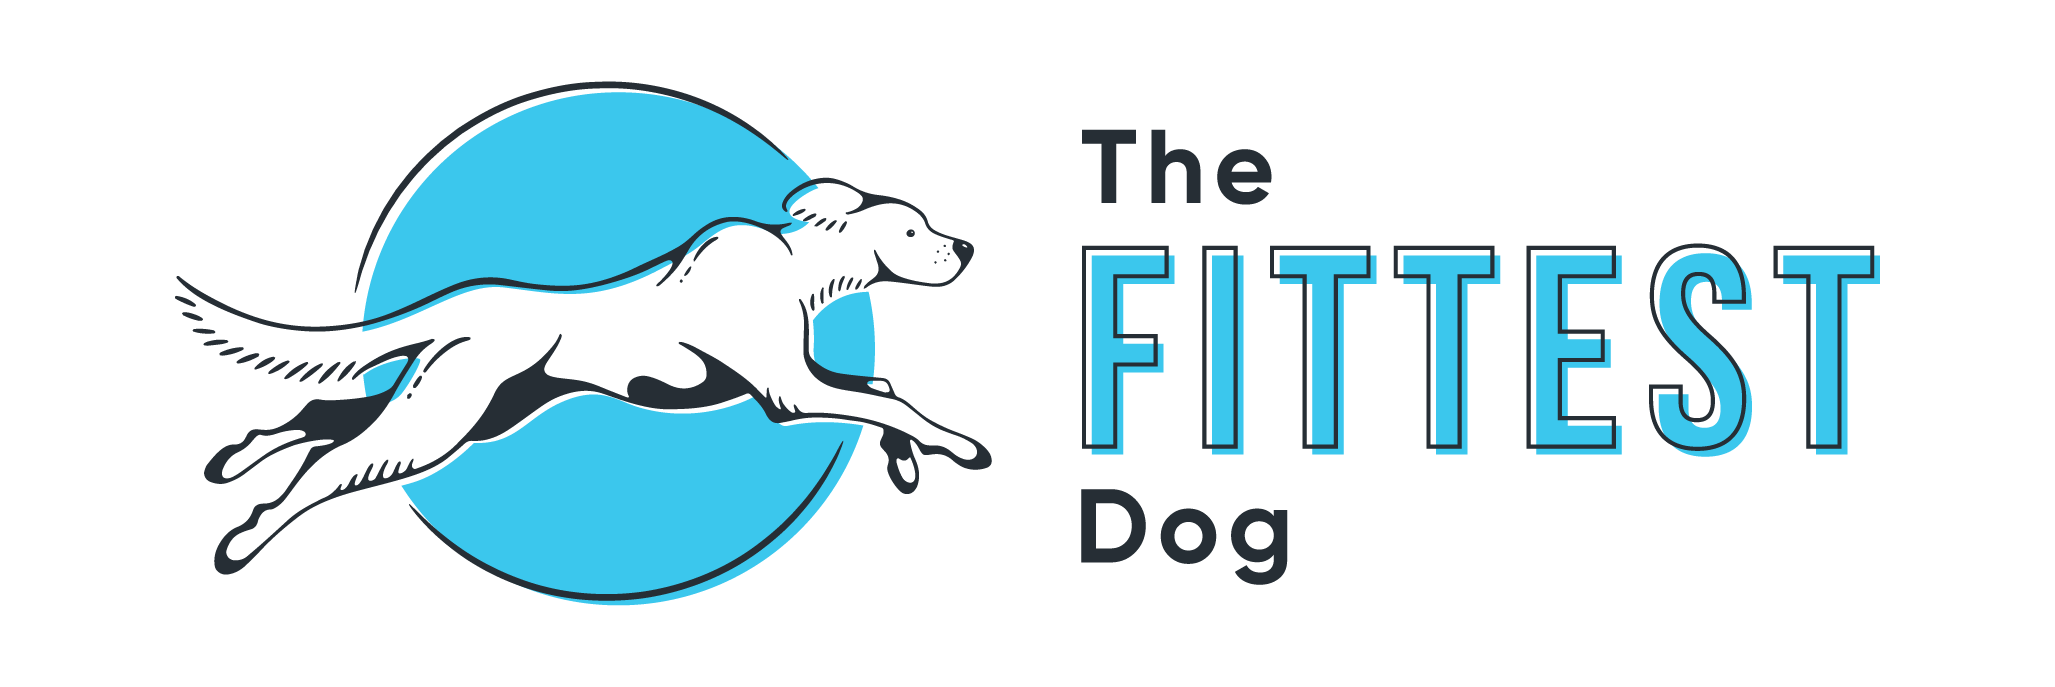 Logo design for dog walking running business in San Diego California The Fittest Dog